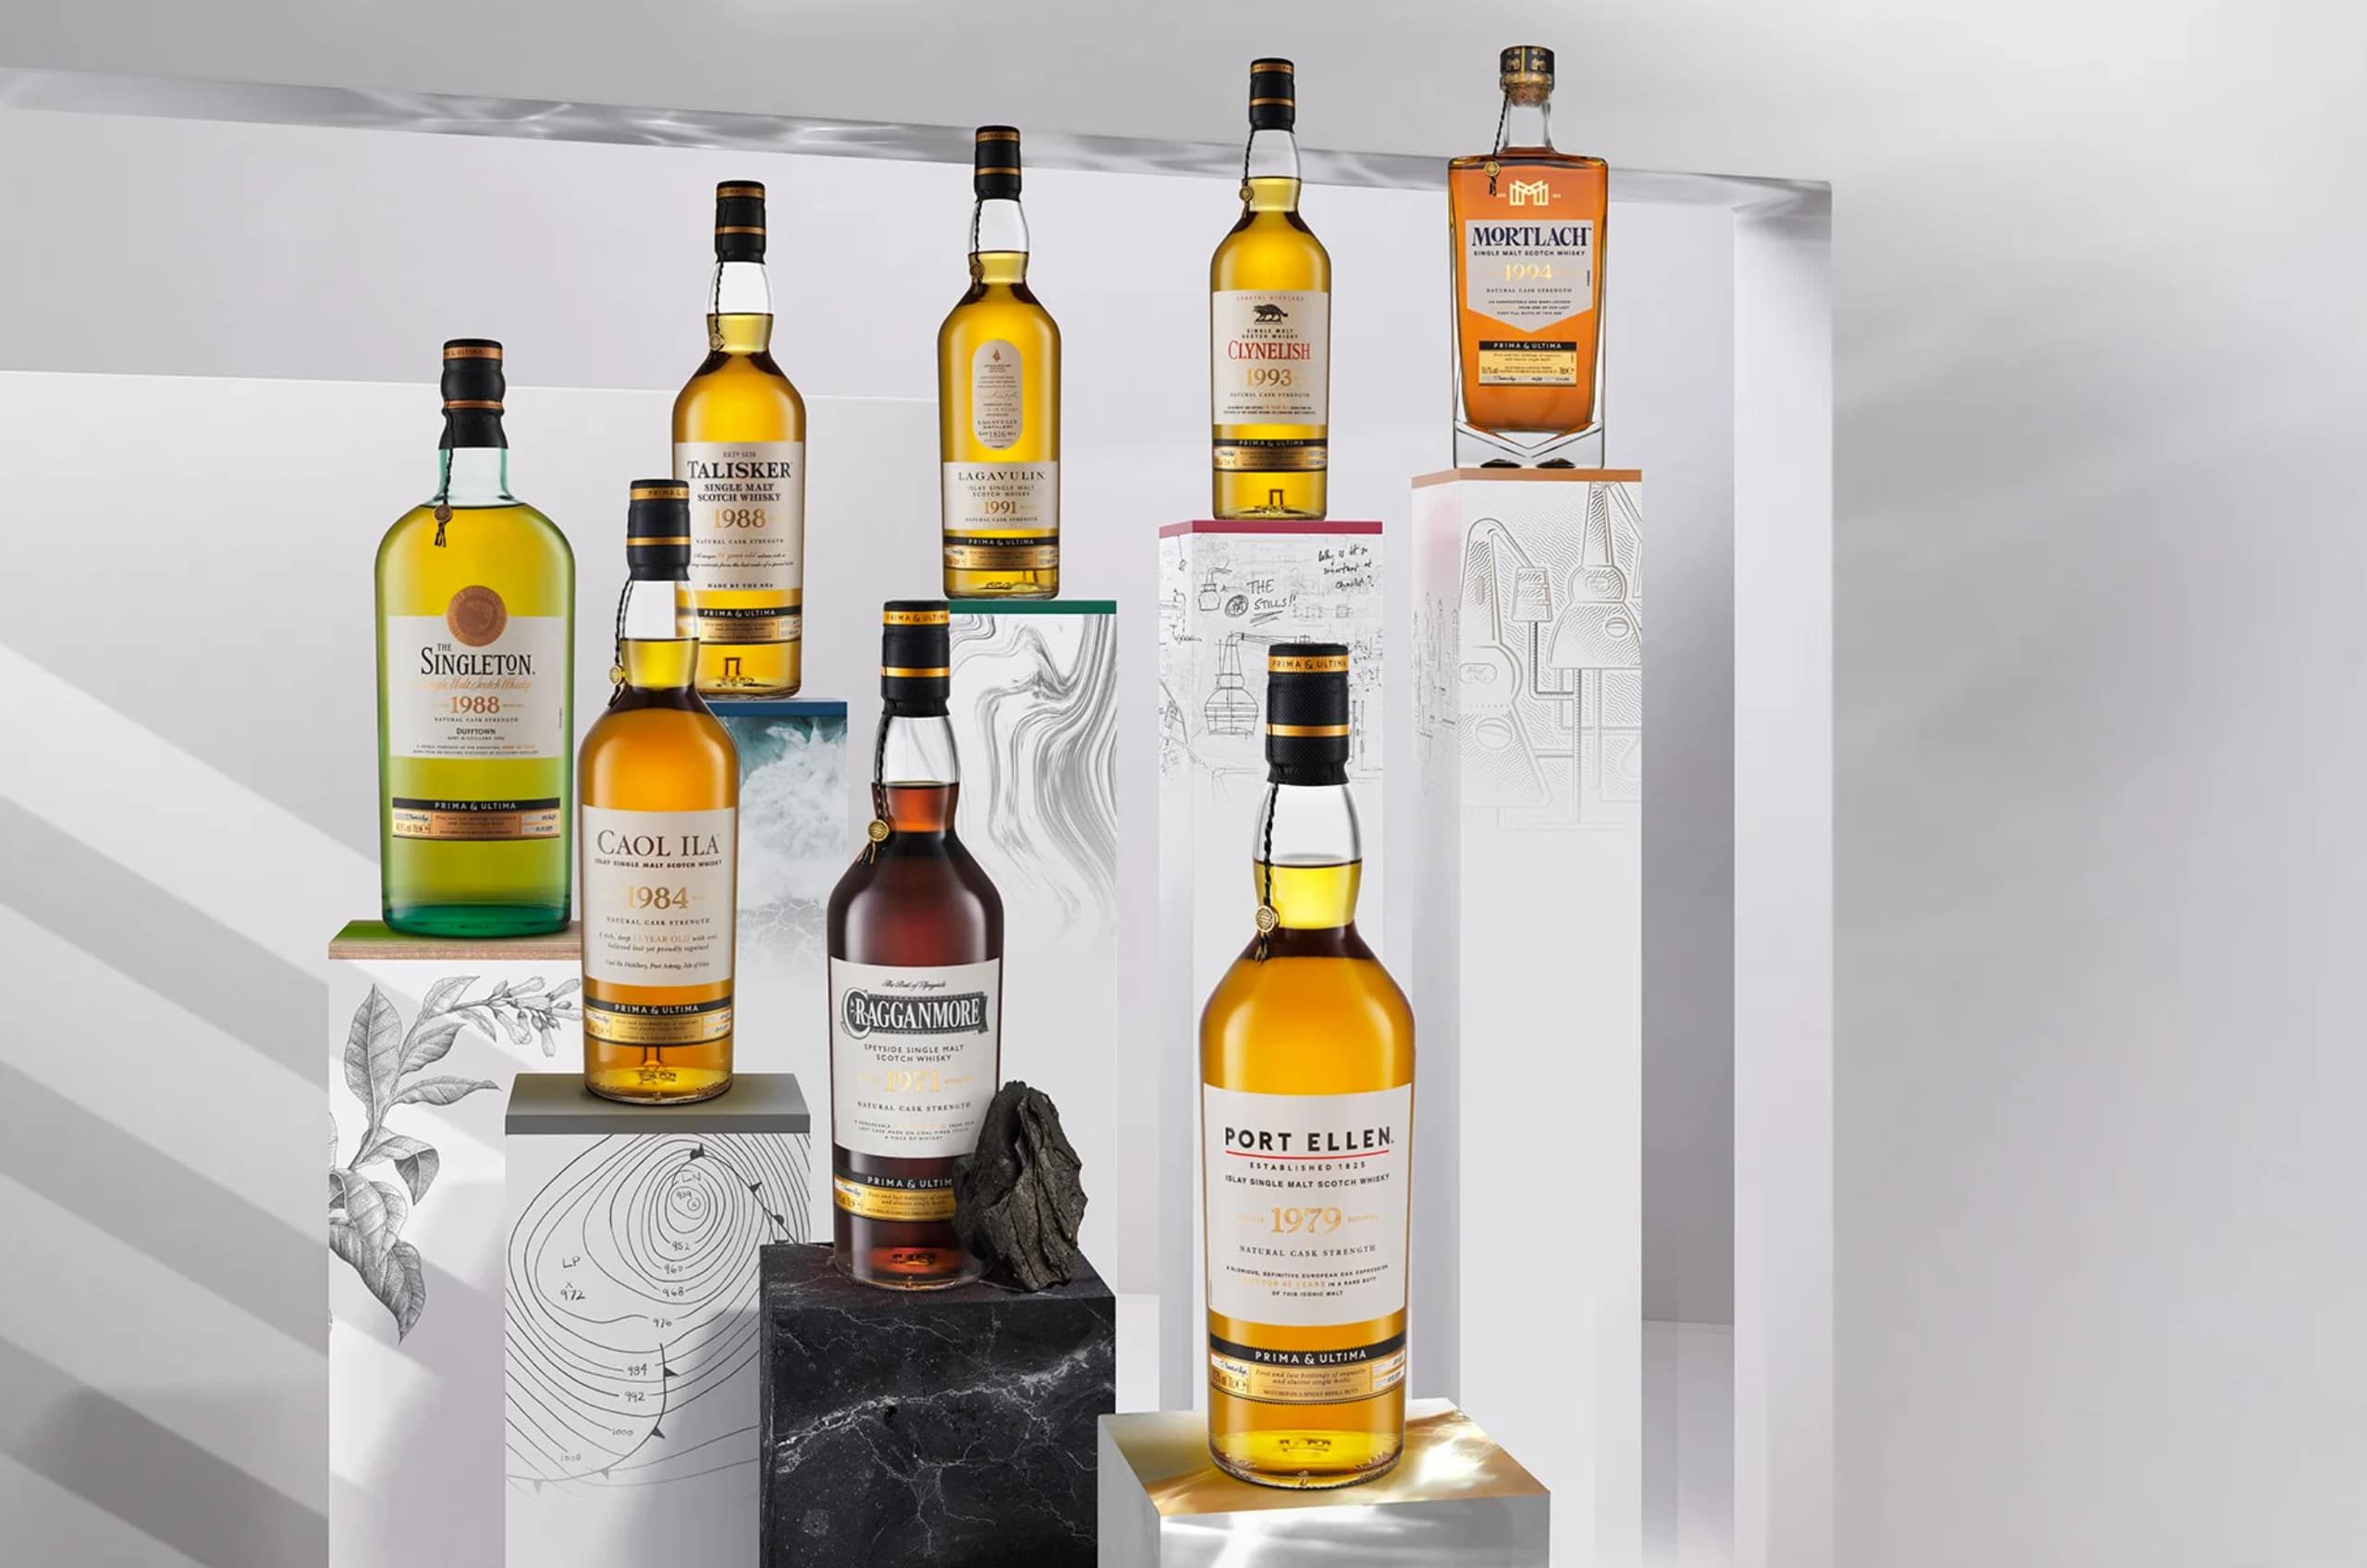 Celebrating the Scottish heritage of Scotch: Diageo’s Prima & Ultima Whisky Collection